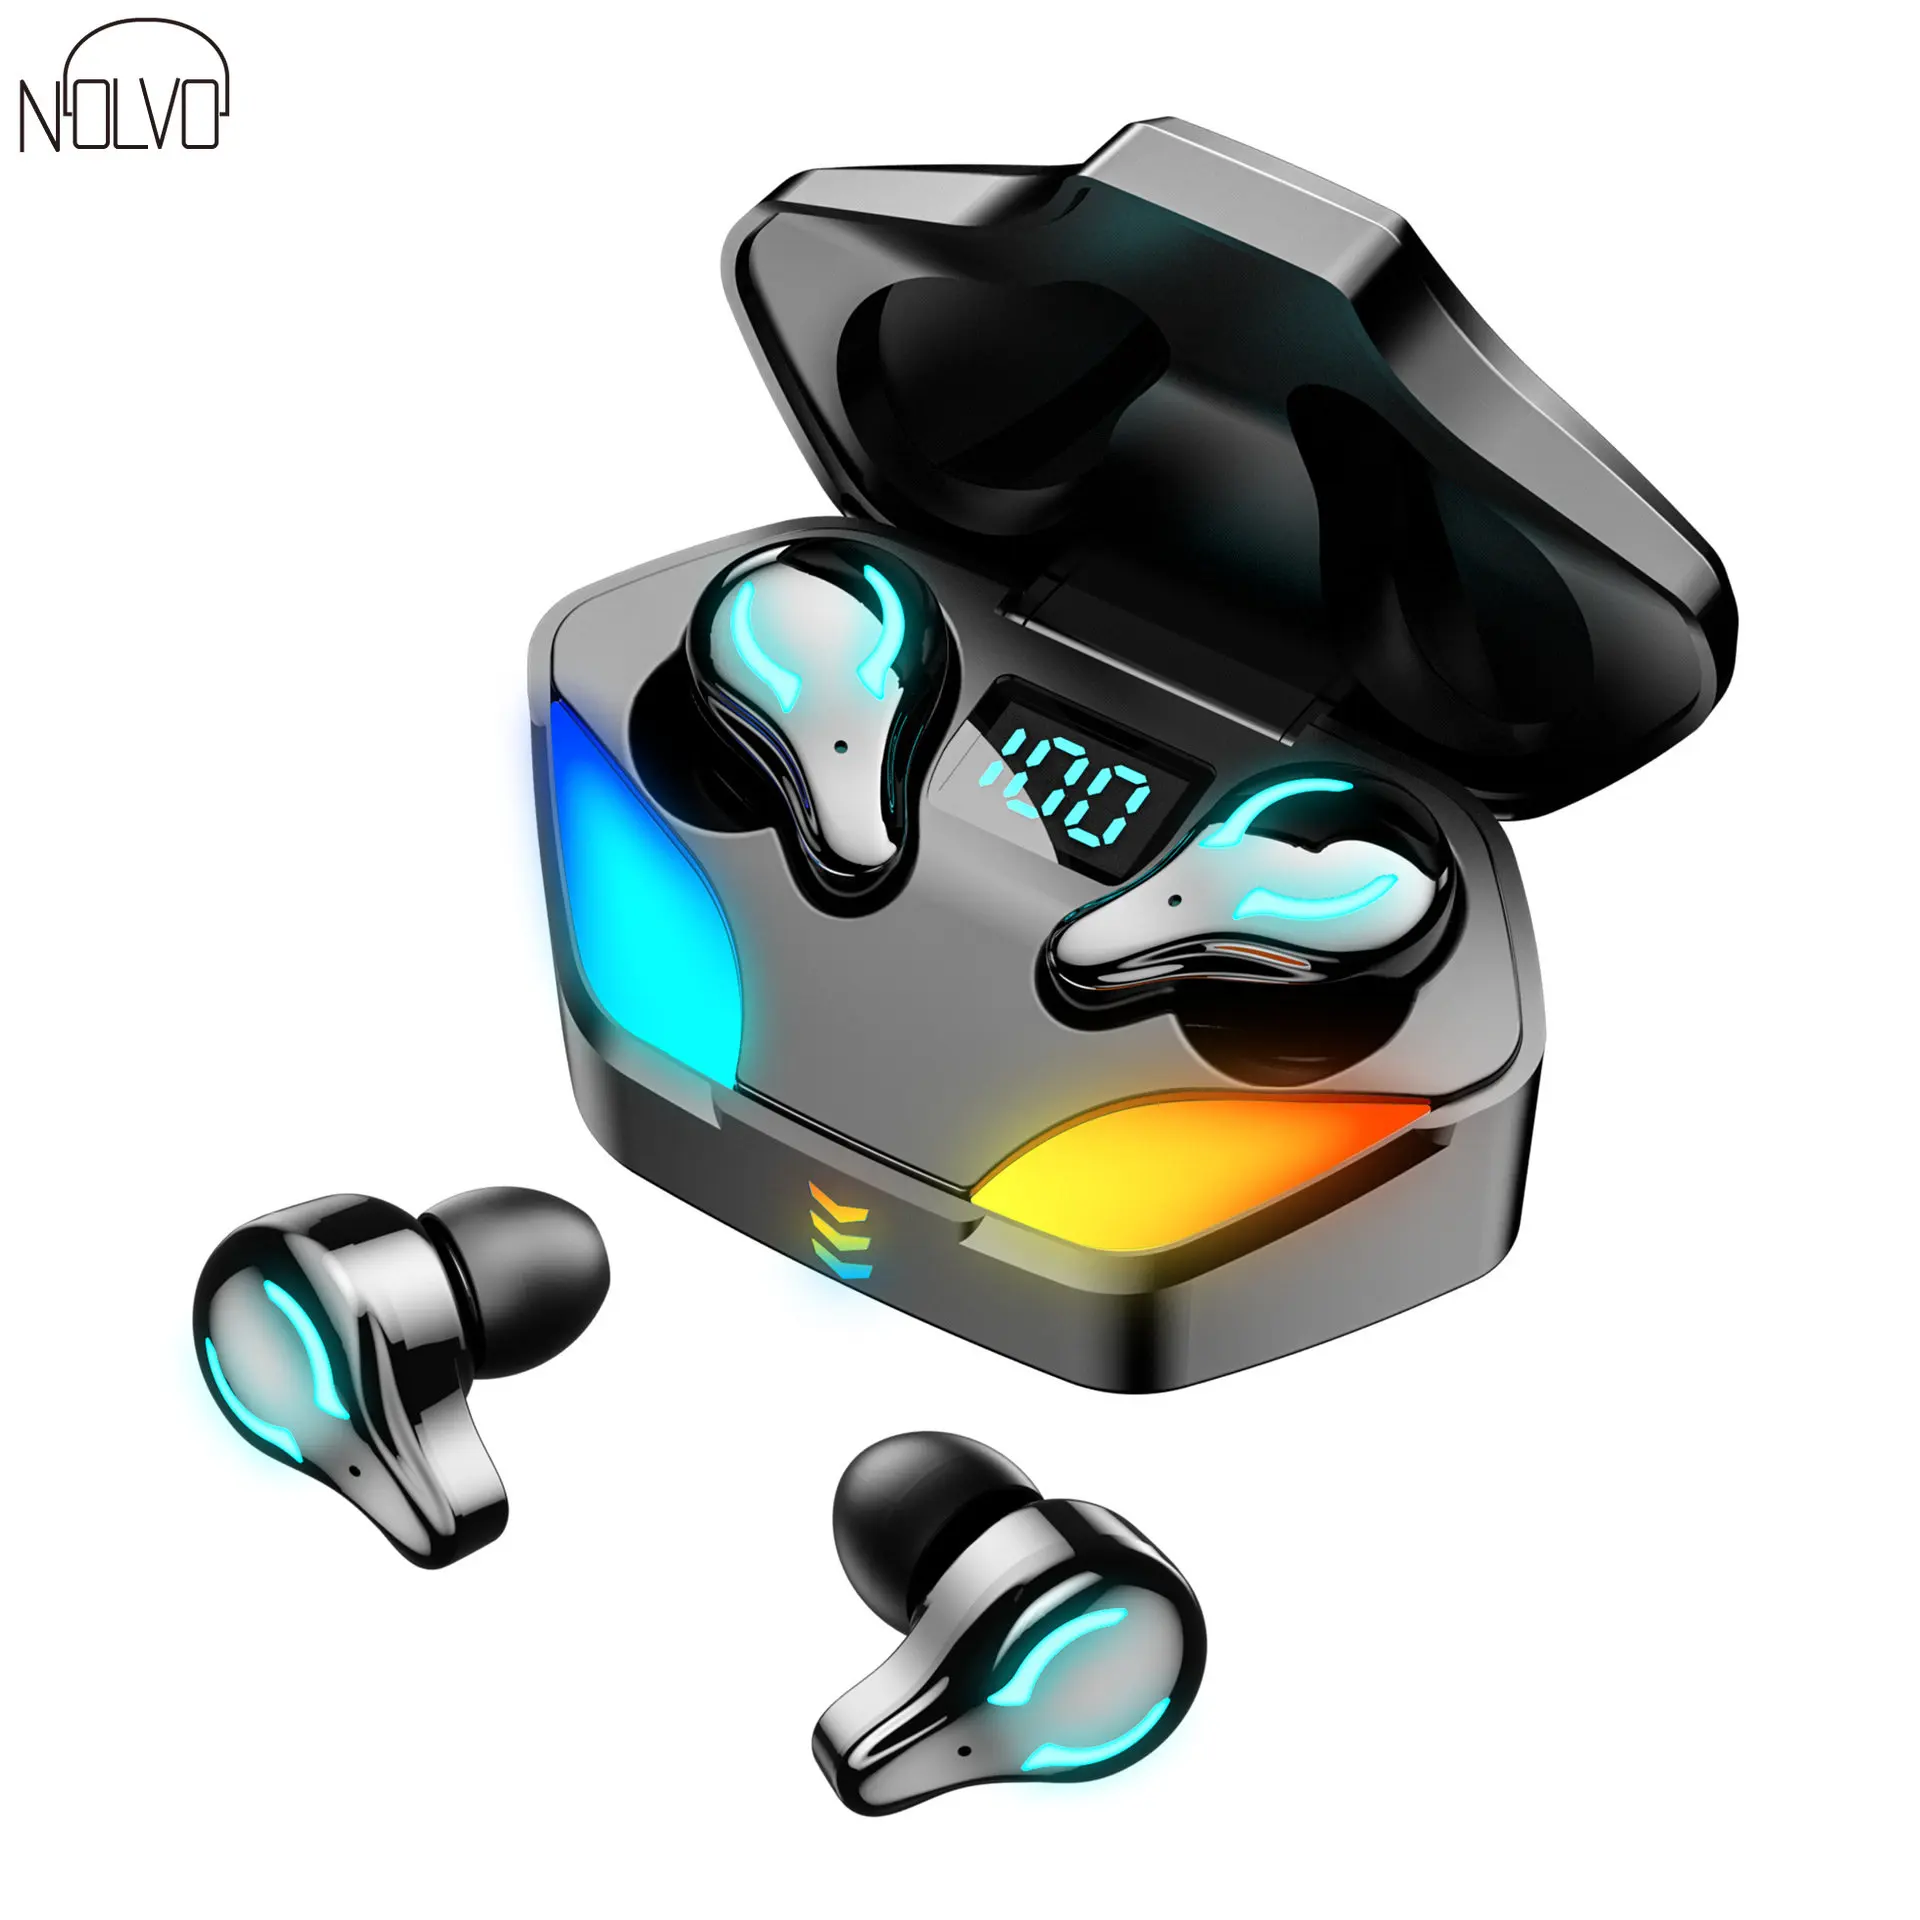 

Noise Cancelling Surround Sound Bluetooth 5.1 Gaming Ear Buds Wireless Earbuds Earphone Box Headphones Headsets With Microphone